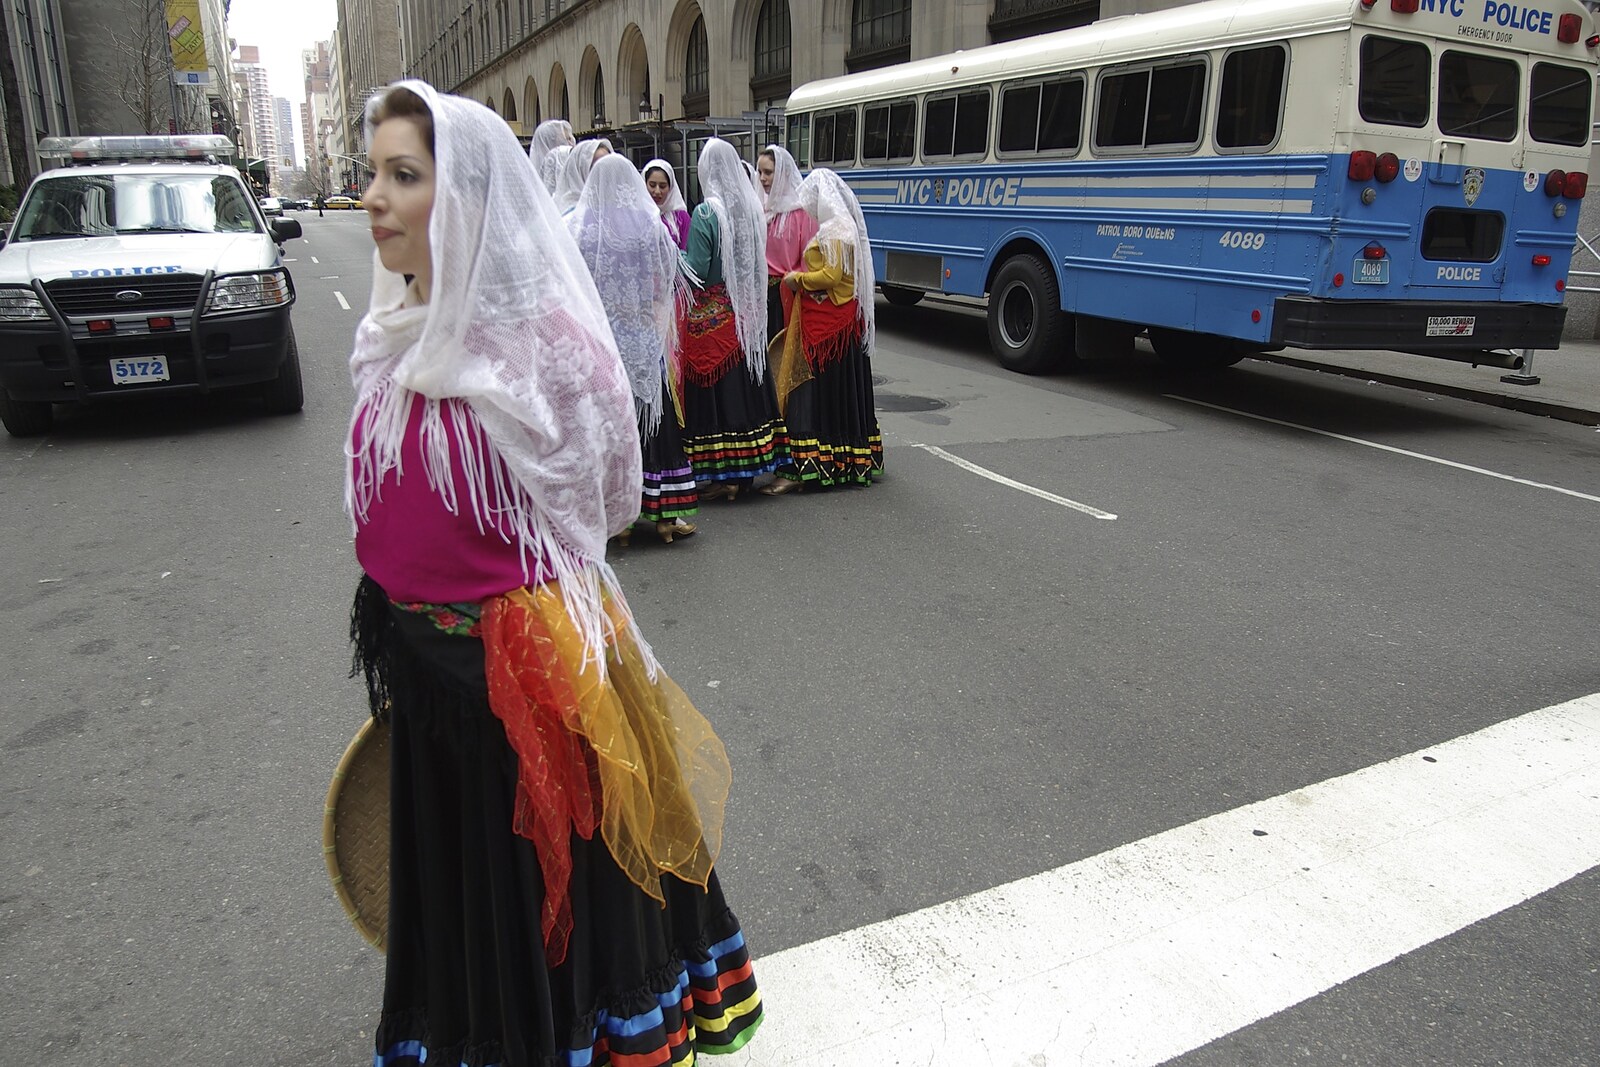 Persian Day Parade, Upper East Side and Midtown, New York, US - 25th March 2007: Crossing the street near a police bus